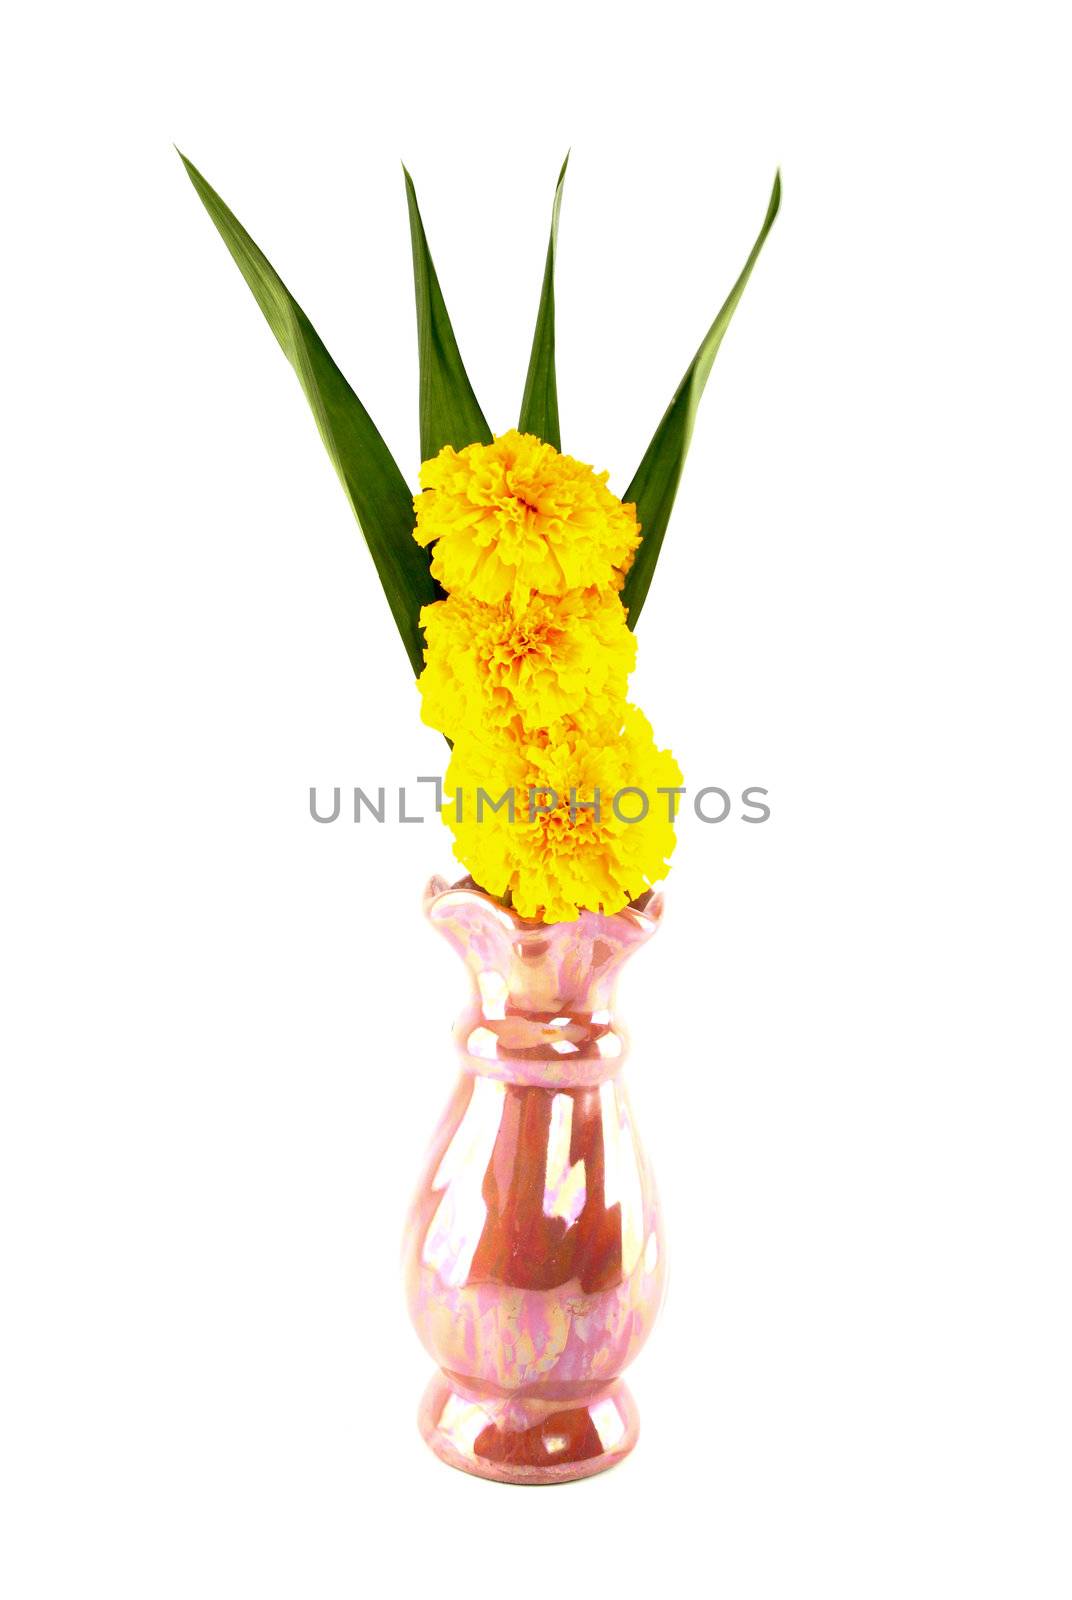 Marigold and pandan in vase for worship on white background